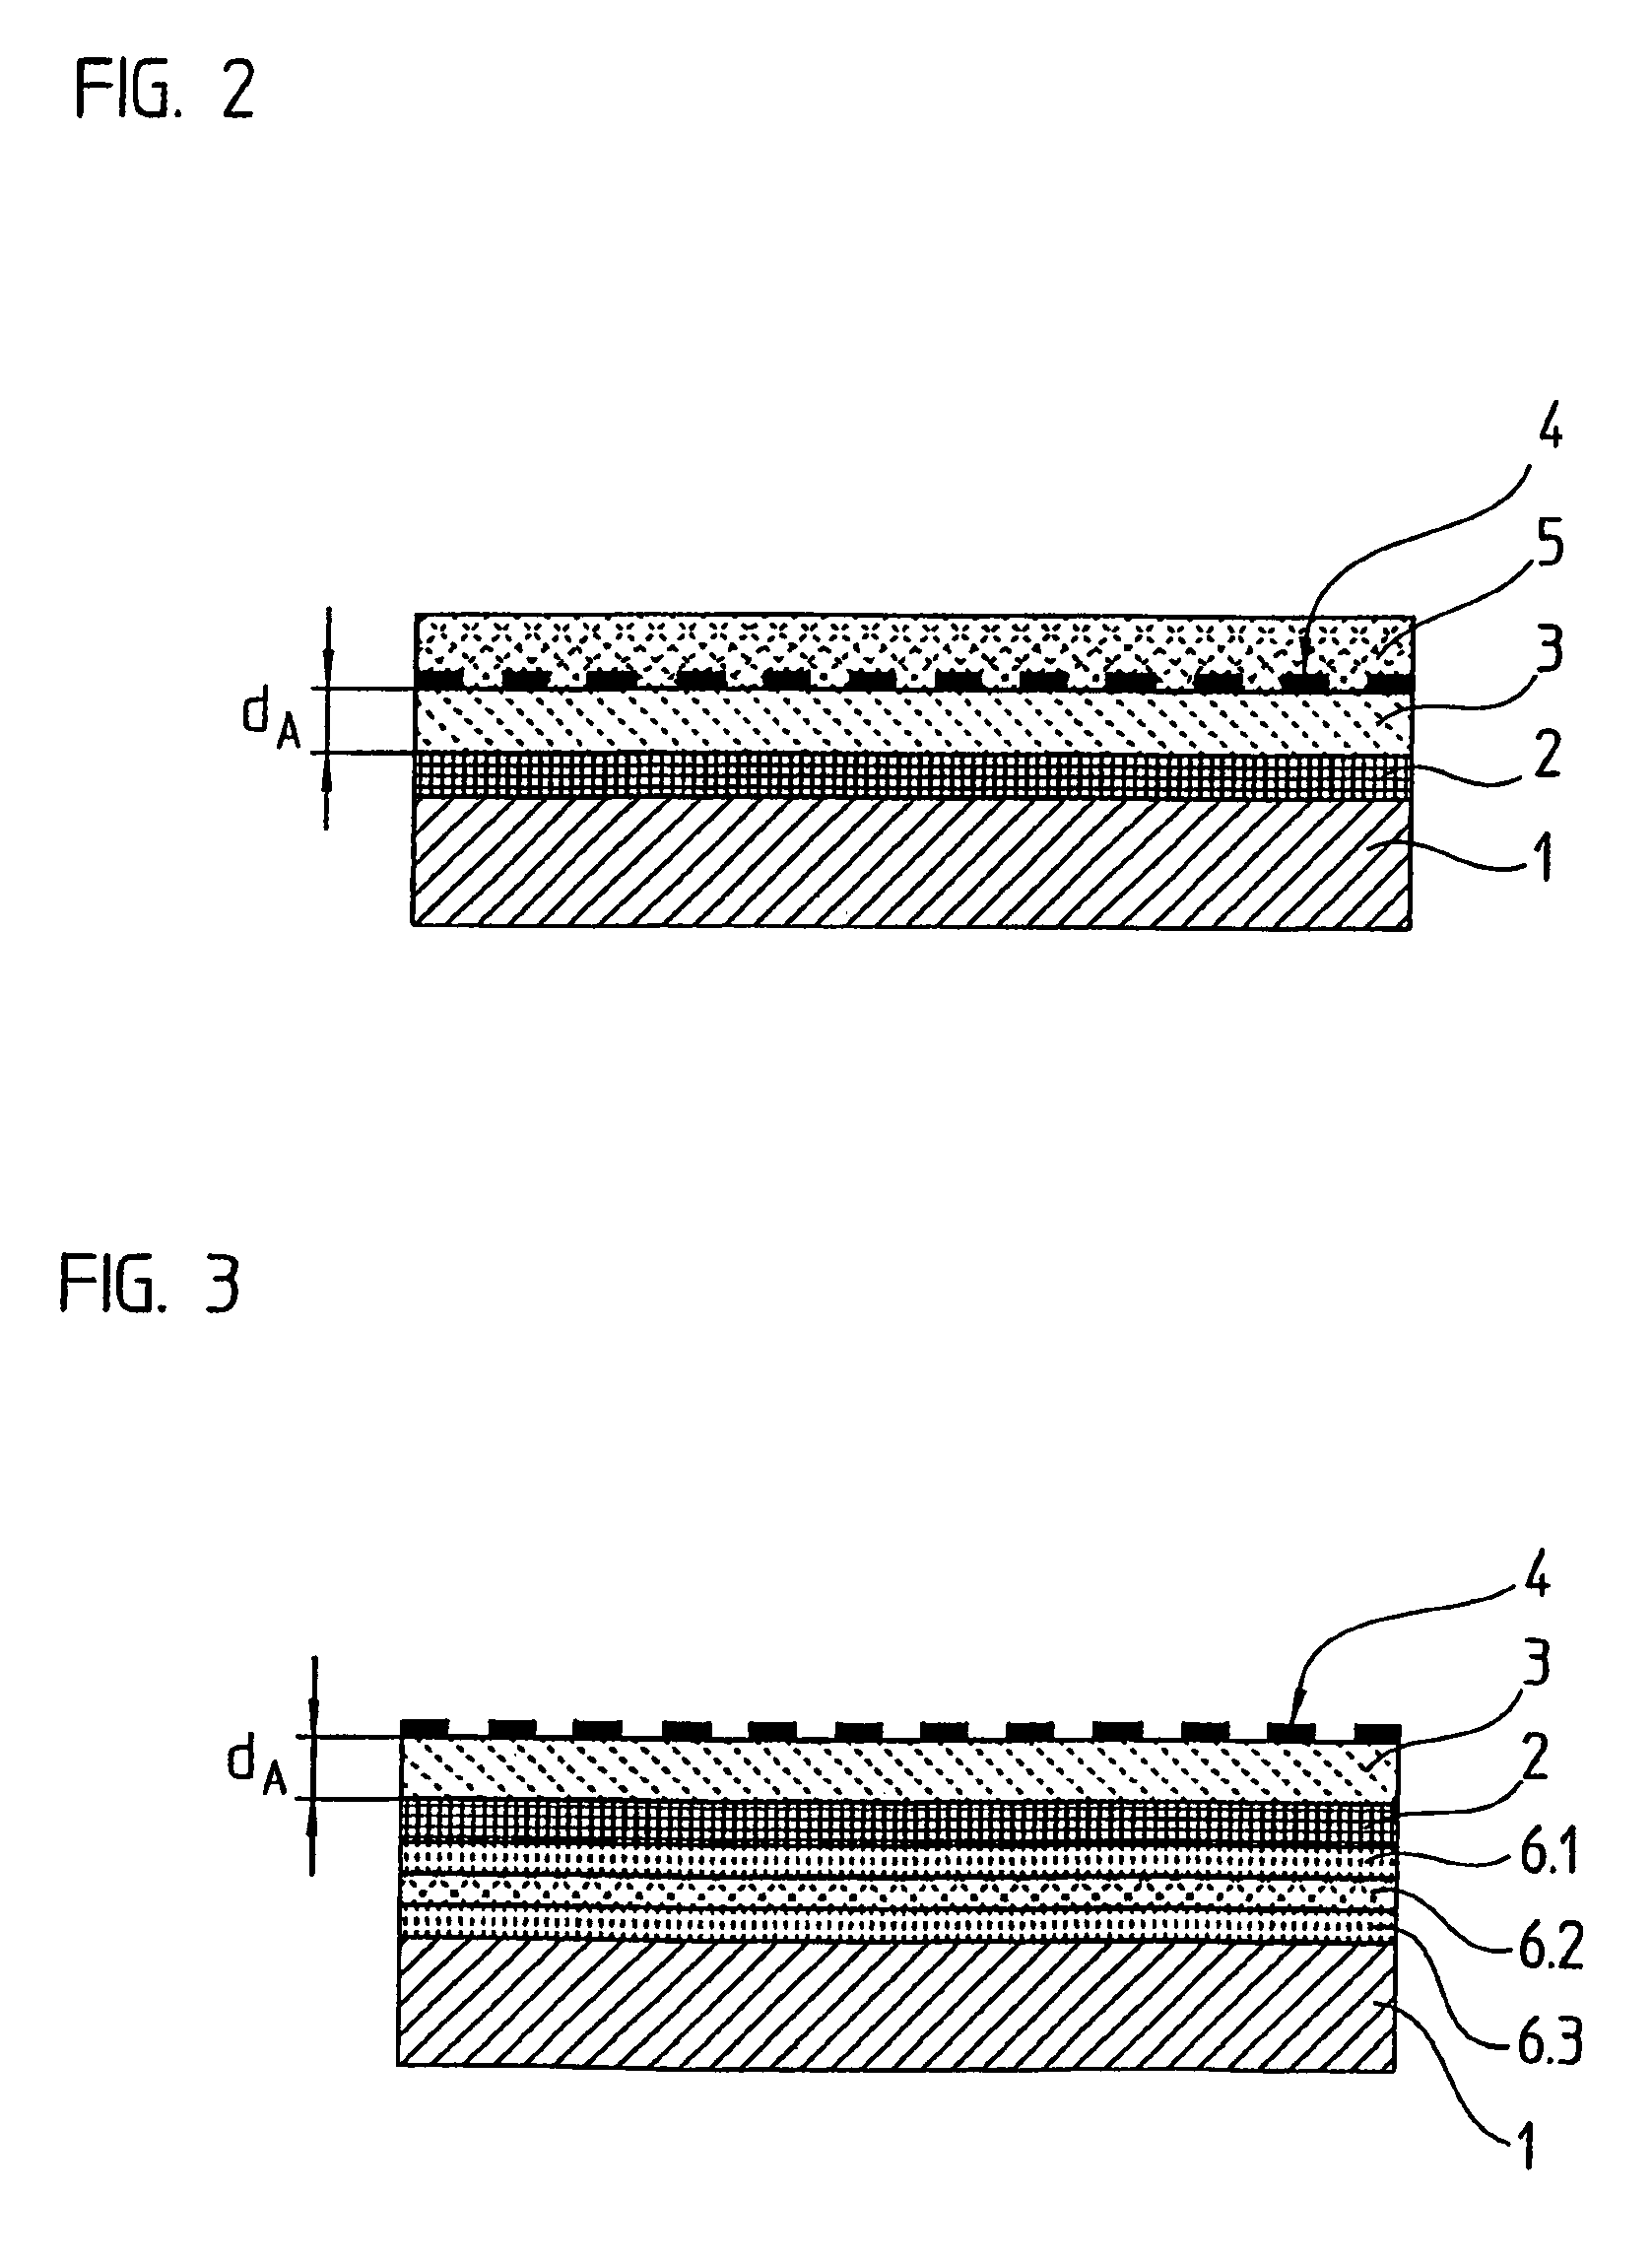 Method for manufacturing a scale, a scale manufactured according to the method and a position measuring device